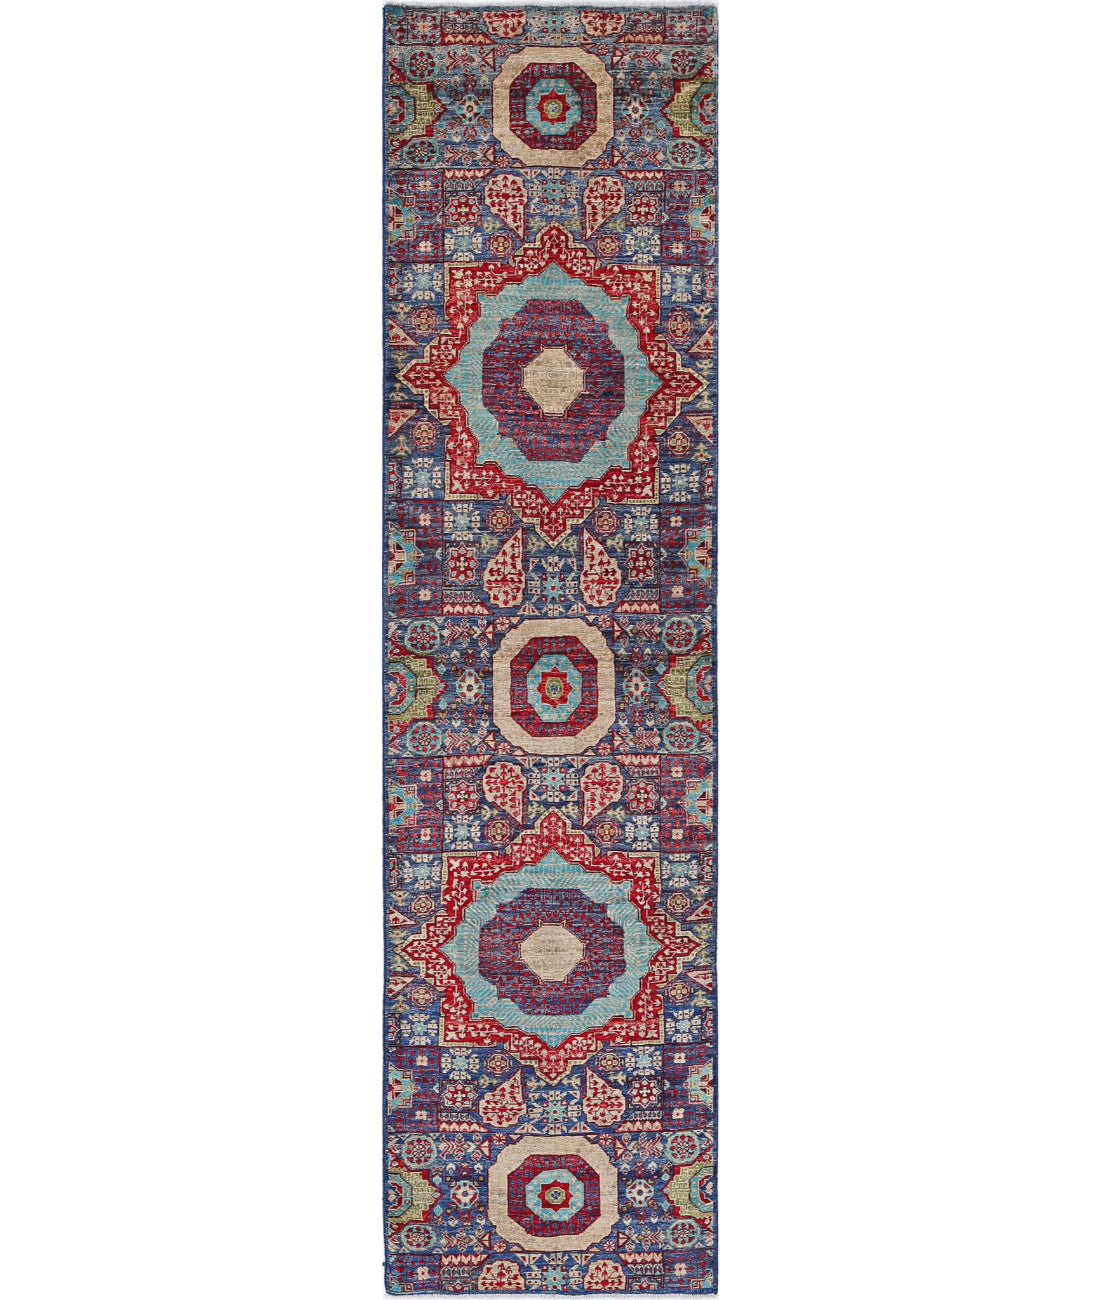 Hand Knotted Mamluk Wool Rug - 2&#39;6&#39;&#39; x 9&#39;10&#39;&#39; 2&#39;6&#39;&#39; x 9&#39;10&#39;&#39; (75 X 295) / Blue / Red